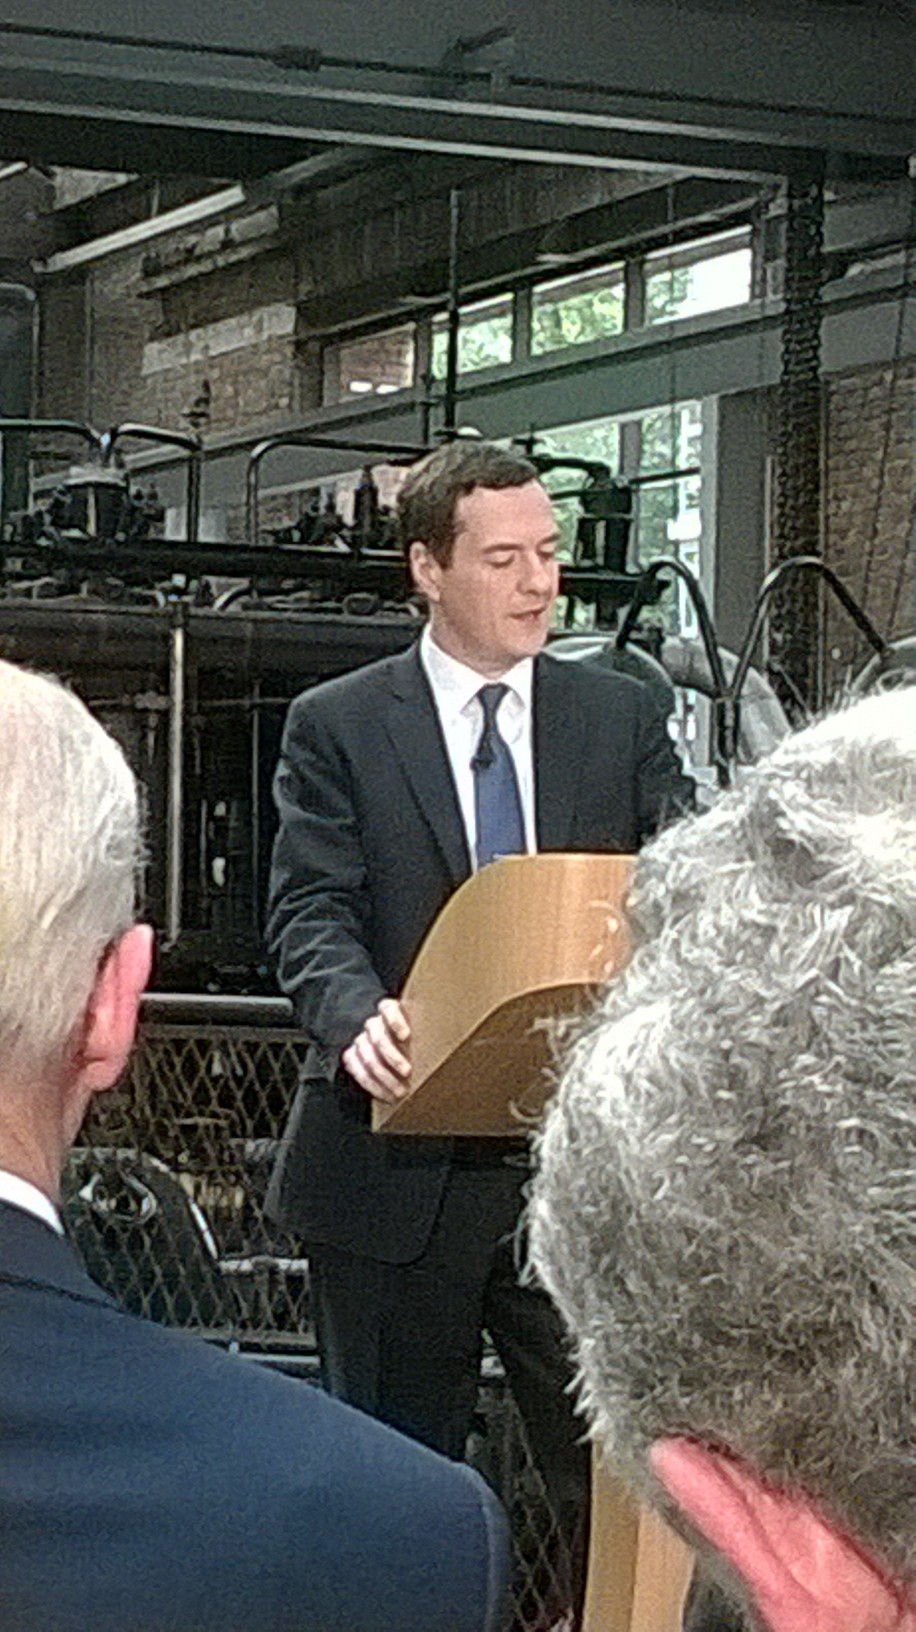 The Chancellor, George Osborne, speaking to a high profile audience at the Museum of Science and Industry, Manchester. Image credit: Roger Highfield